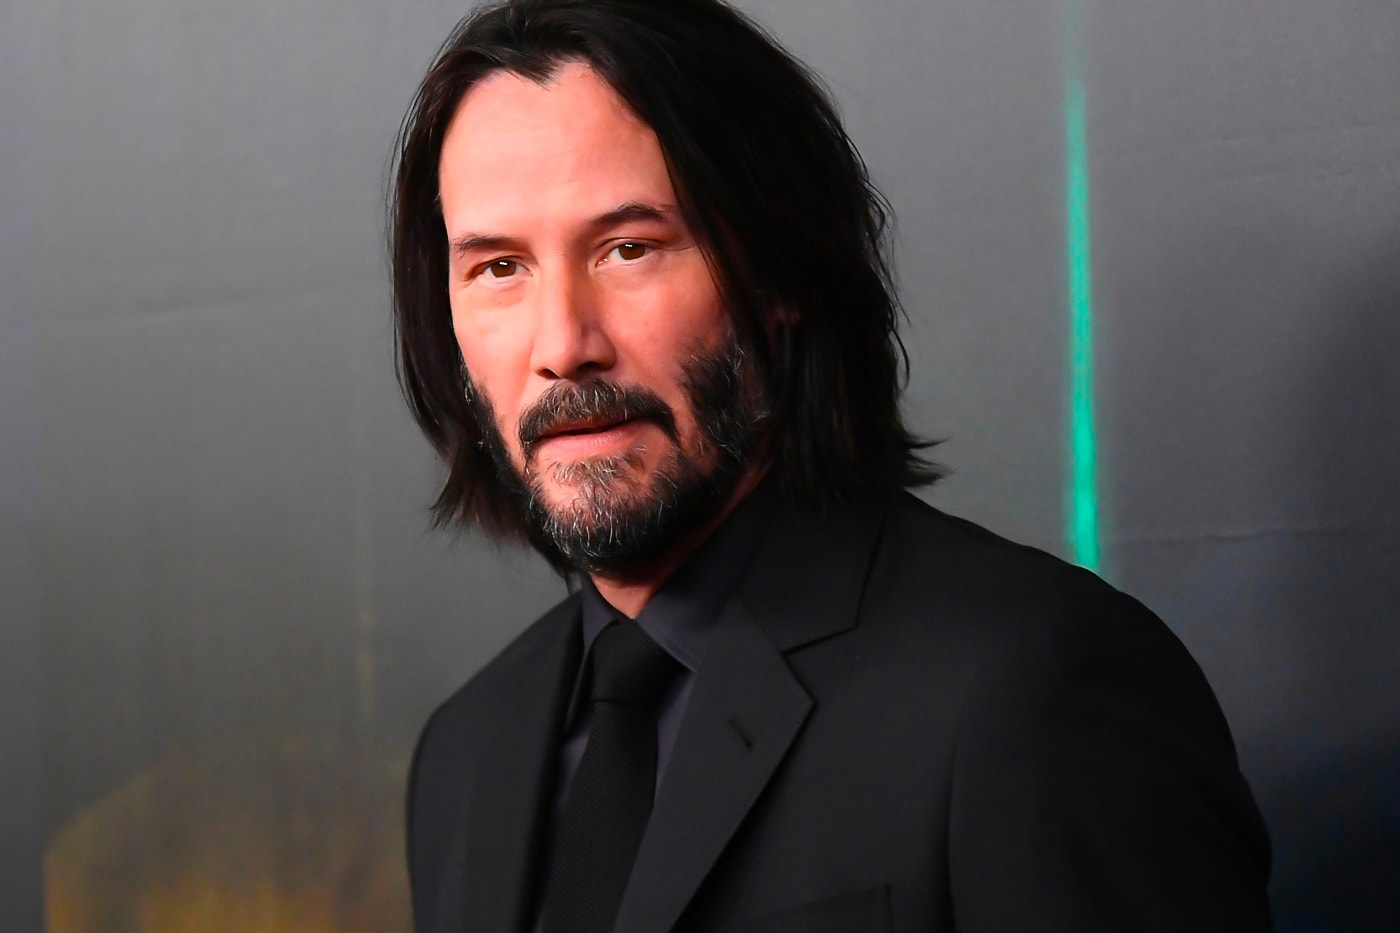 Keanu Reeves Kraven the Hunter Role Offer Spider-Man Spinoff role offer news MCU  Marvel Cinematic Universe  Sony Pictures